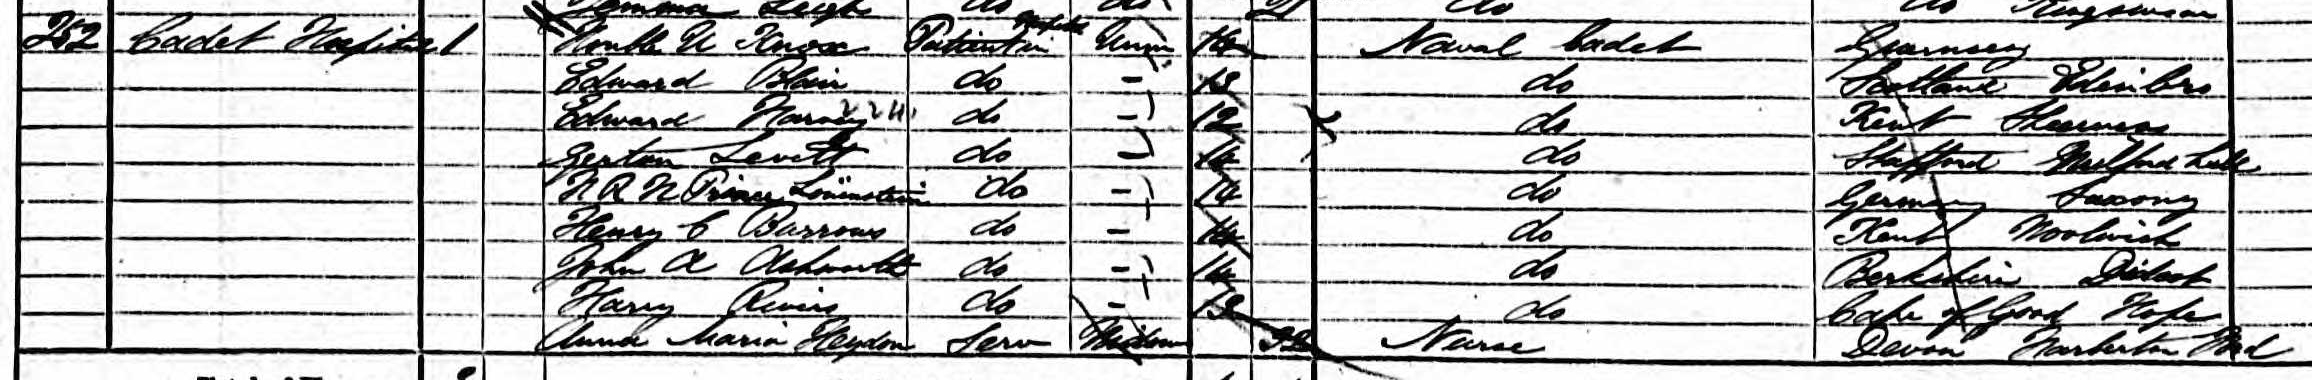 Anna Maria Heydon in the 1871 census.